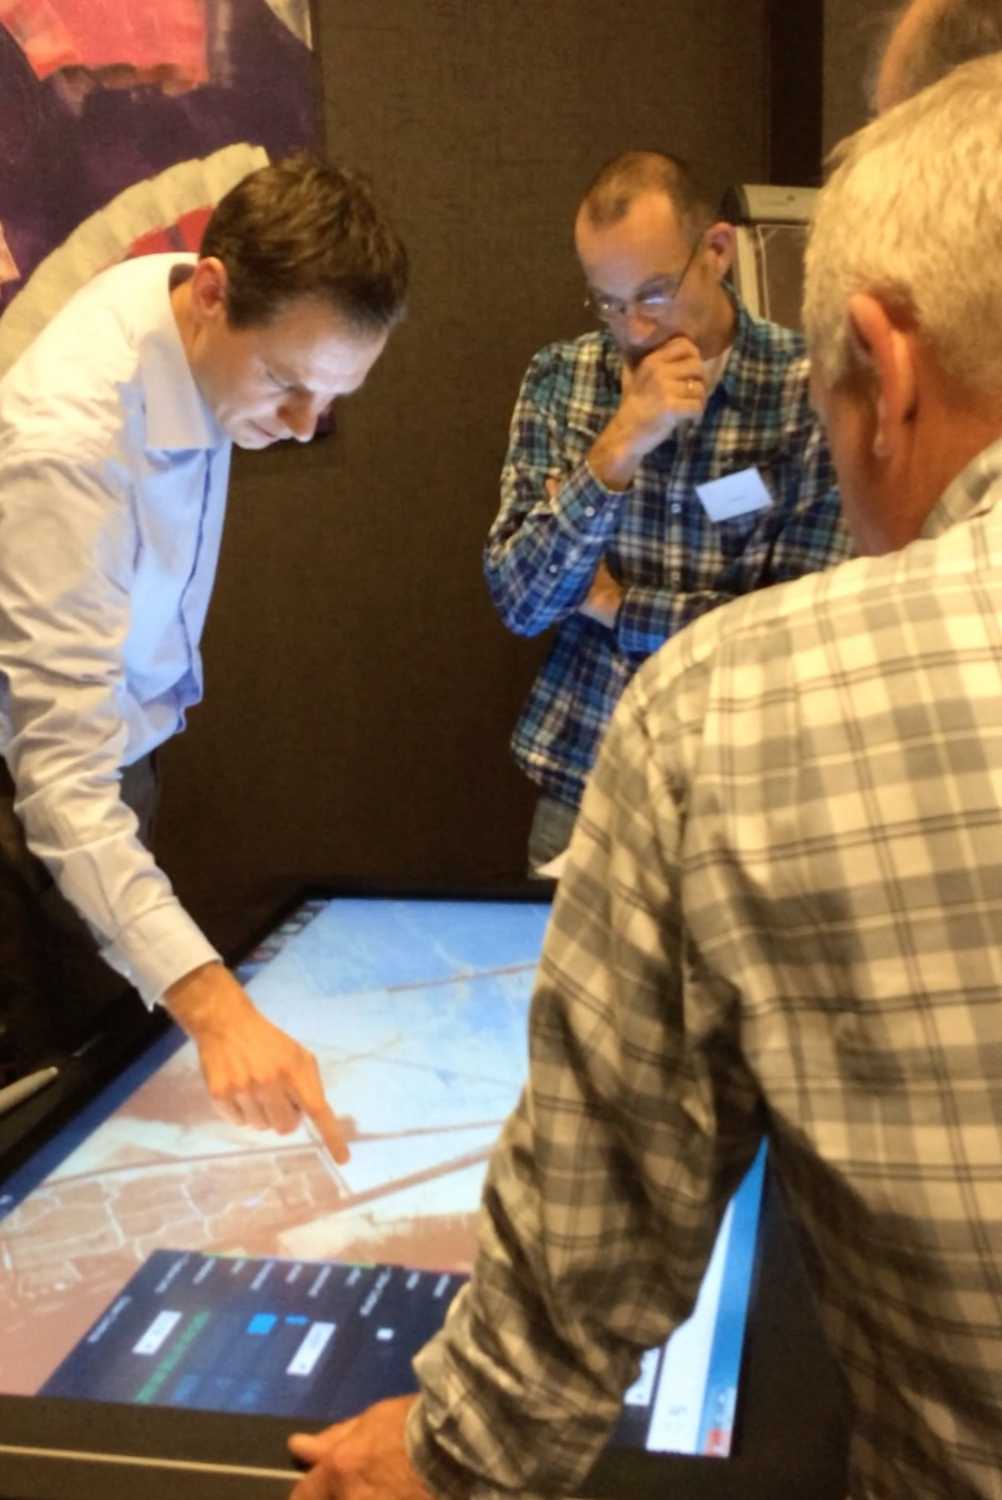 Using the interactive Touch-Table for participatory processes